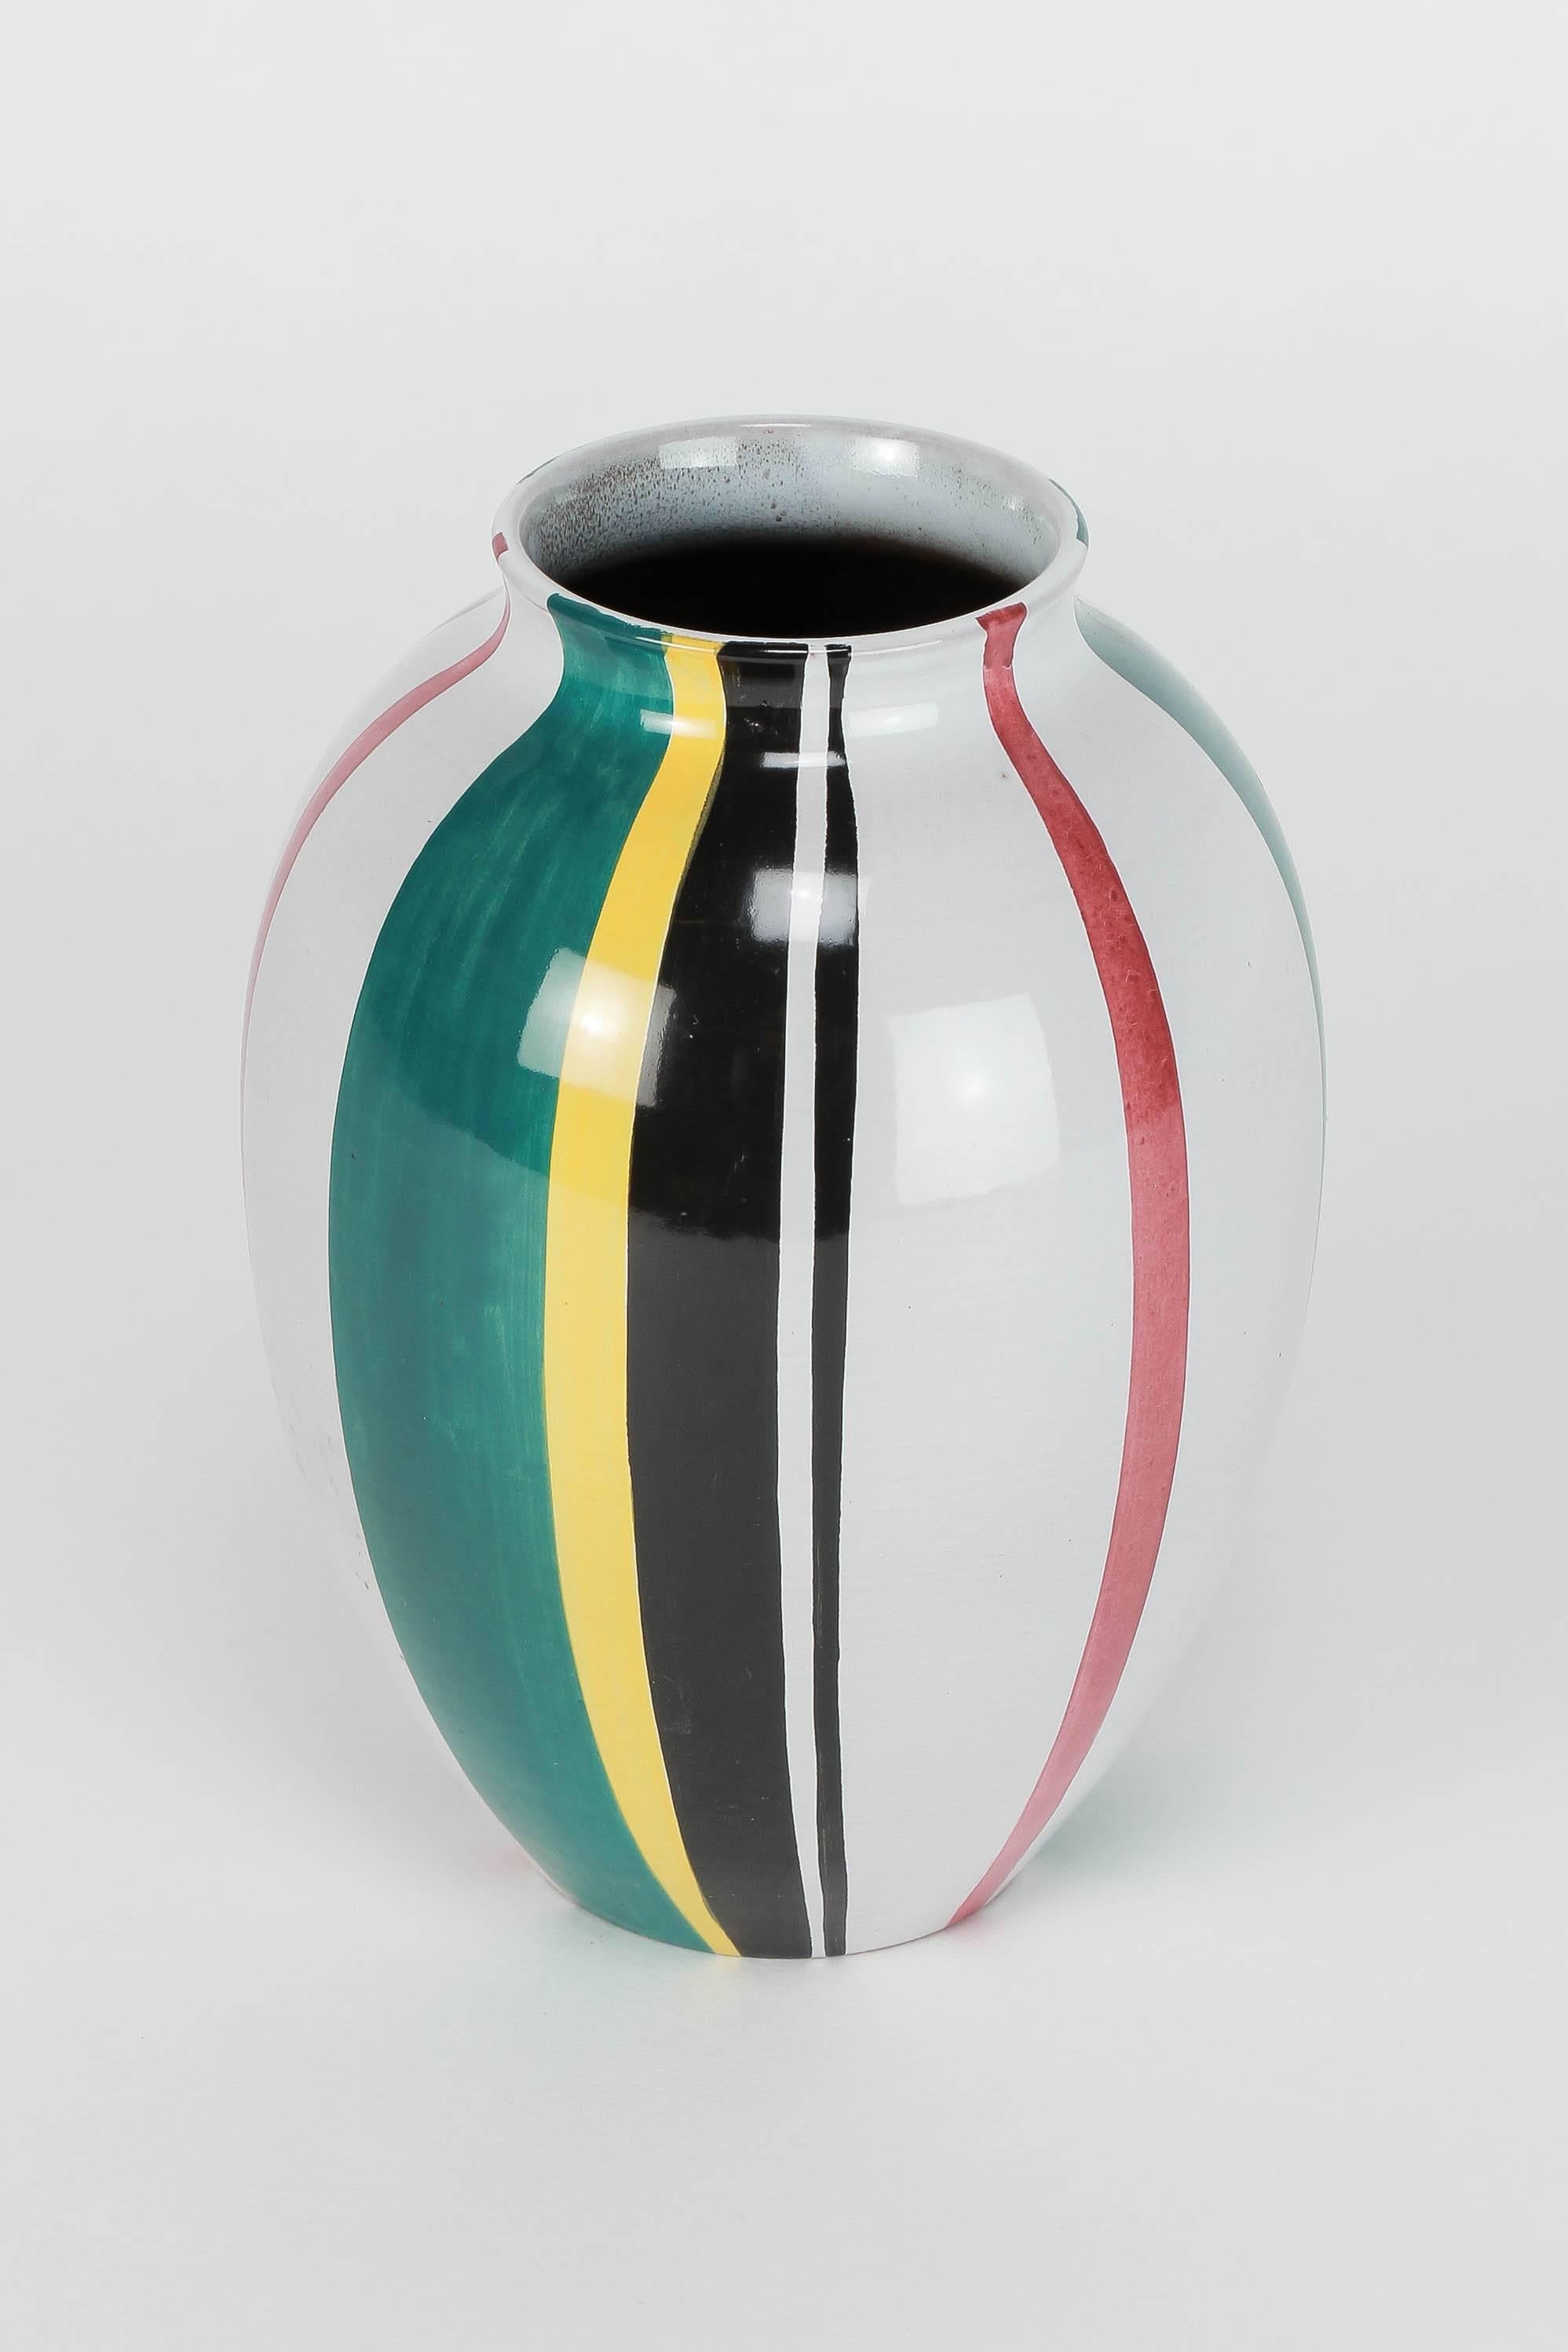 Wonderful Ziegler pottery vase by Gustav Spörri for Ziegler, manufactured in the 1950s in Switzerland. Gray toned undercoat with colorful stripes, hand signed to bottom with "Ziegler Handarbeit, 228" (handarbeit = handcrafted).